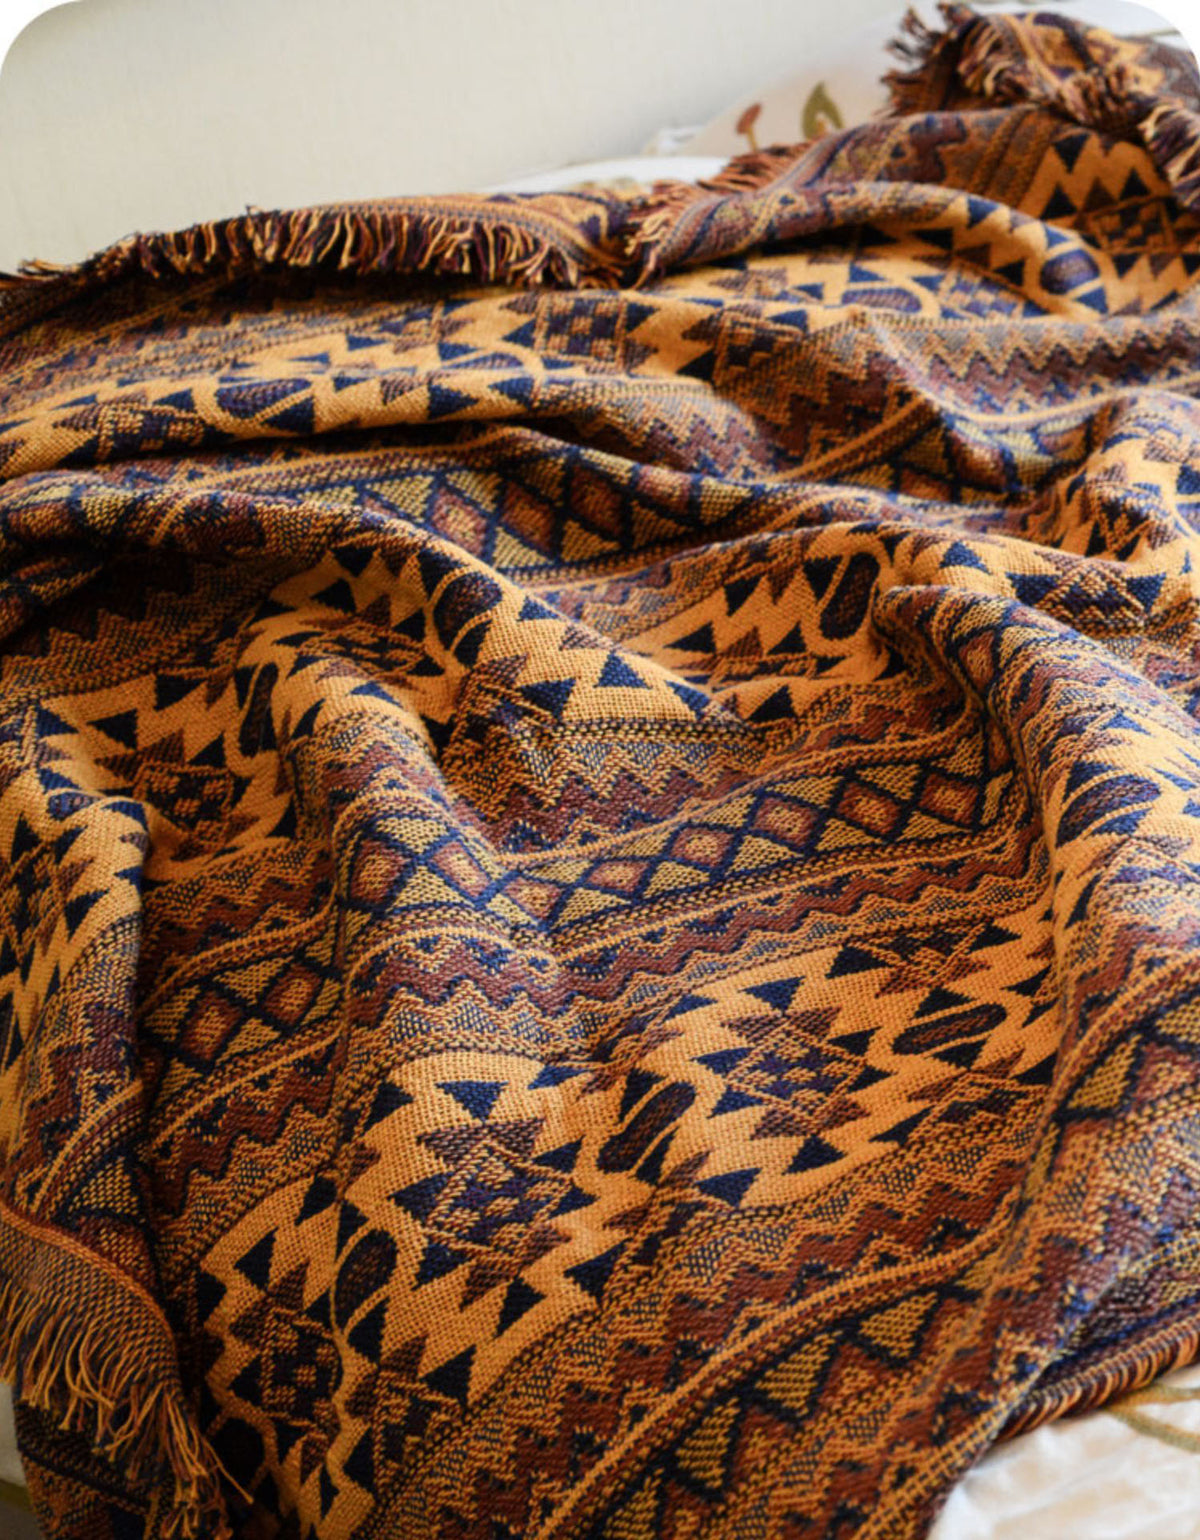 Vintage Indian Style Blankets Sofa Cover